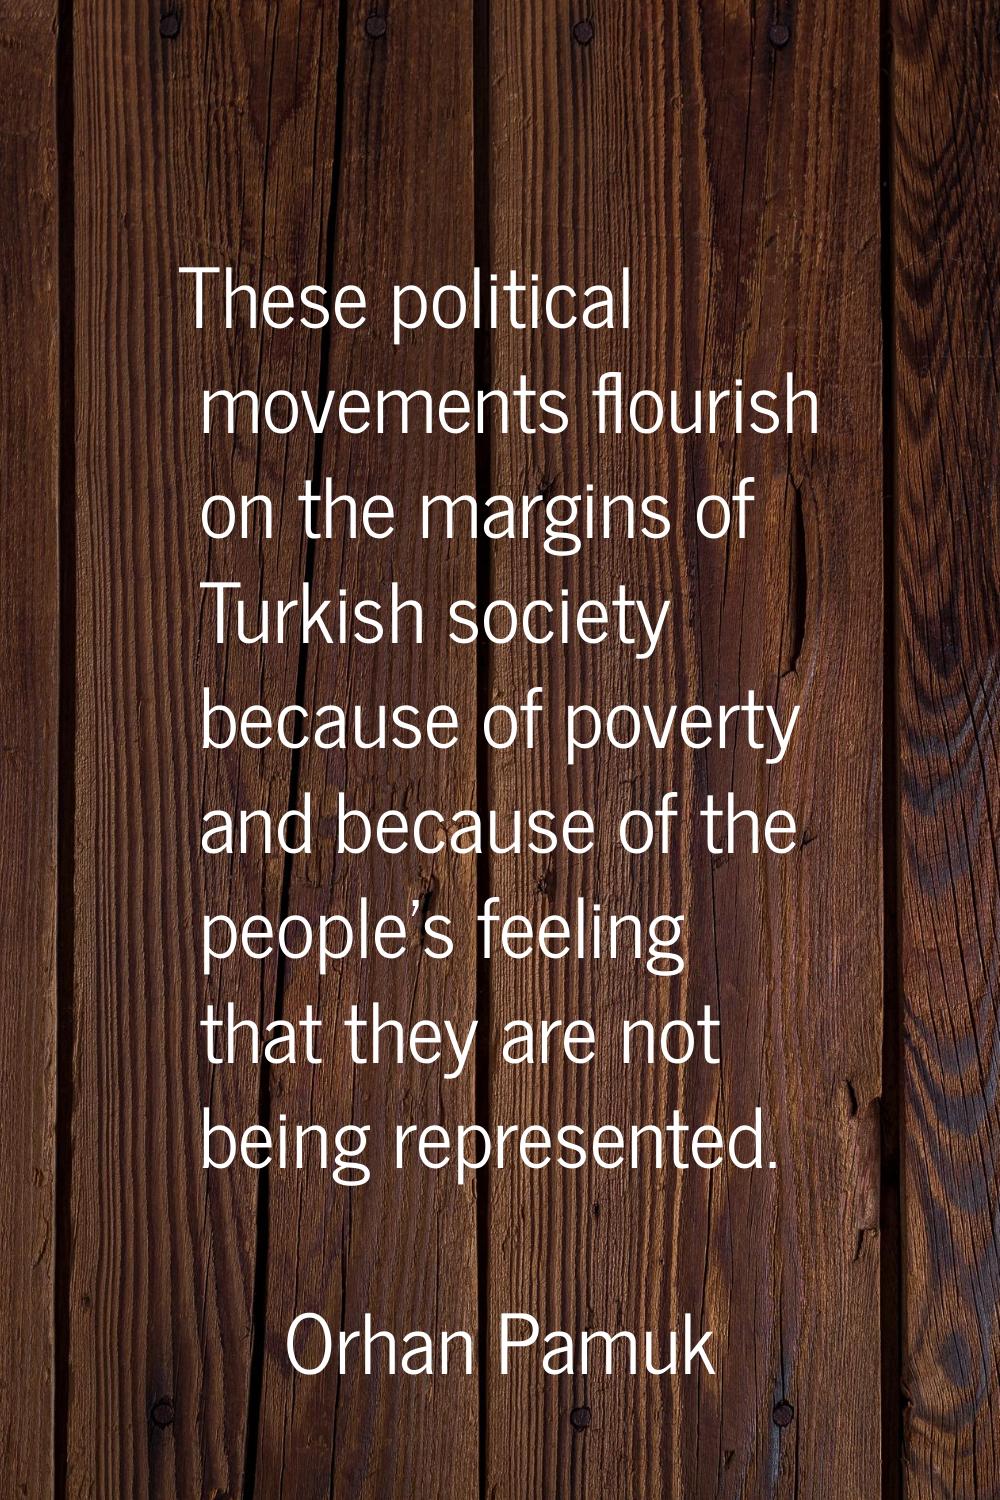 These political movements flourish on the margins of Turkish society because of poverty and because